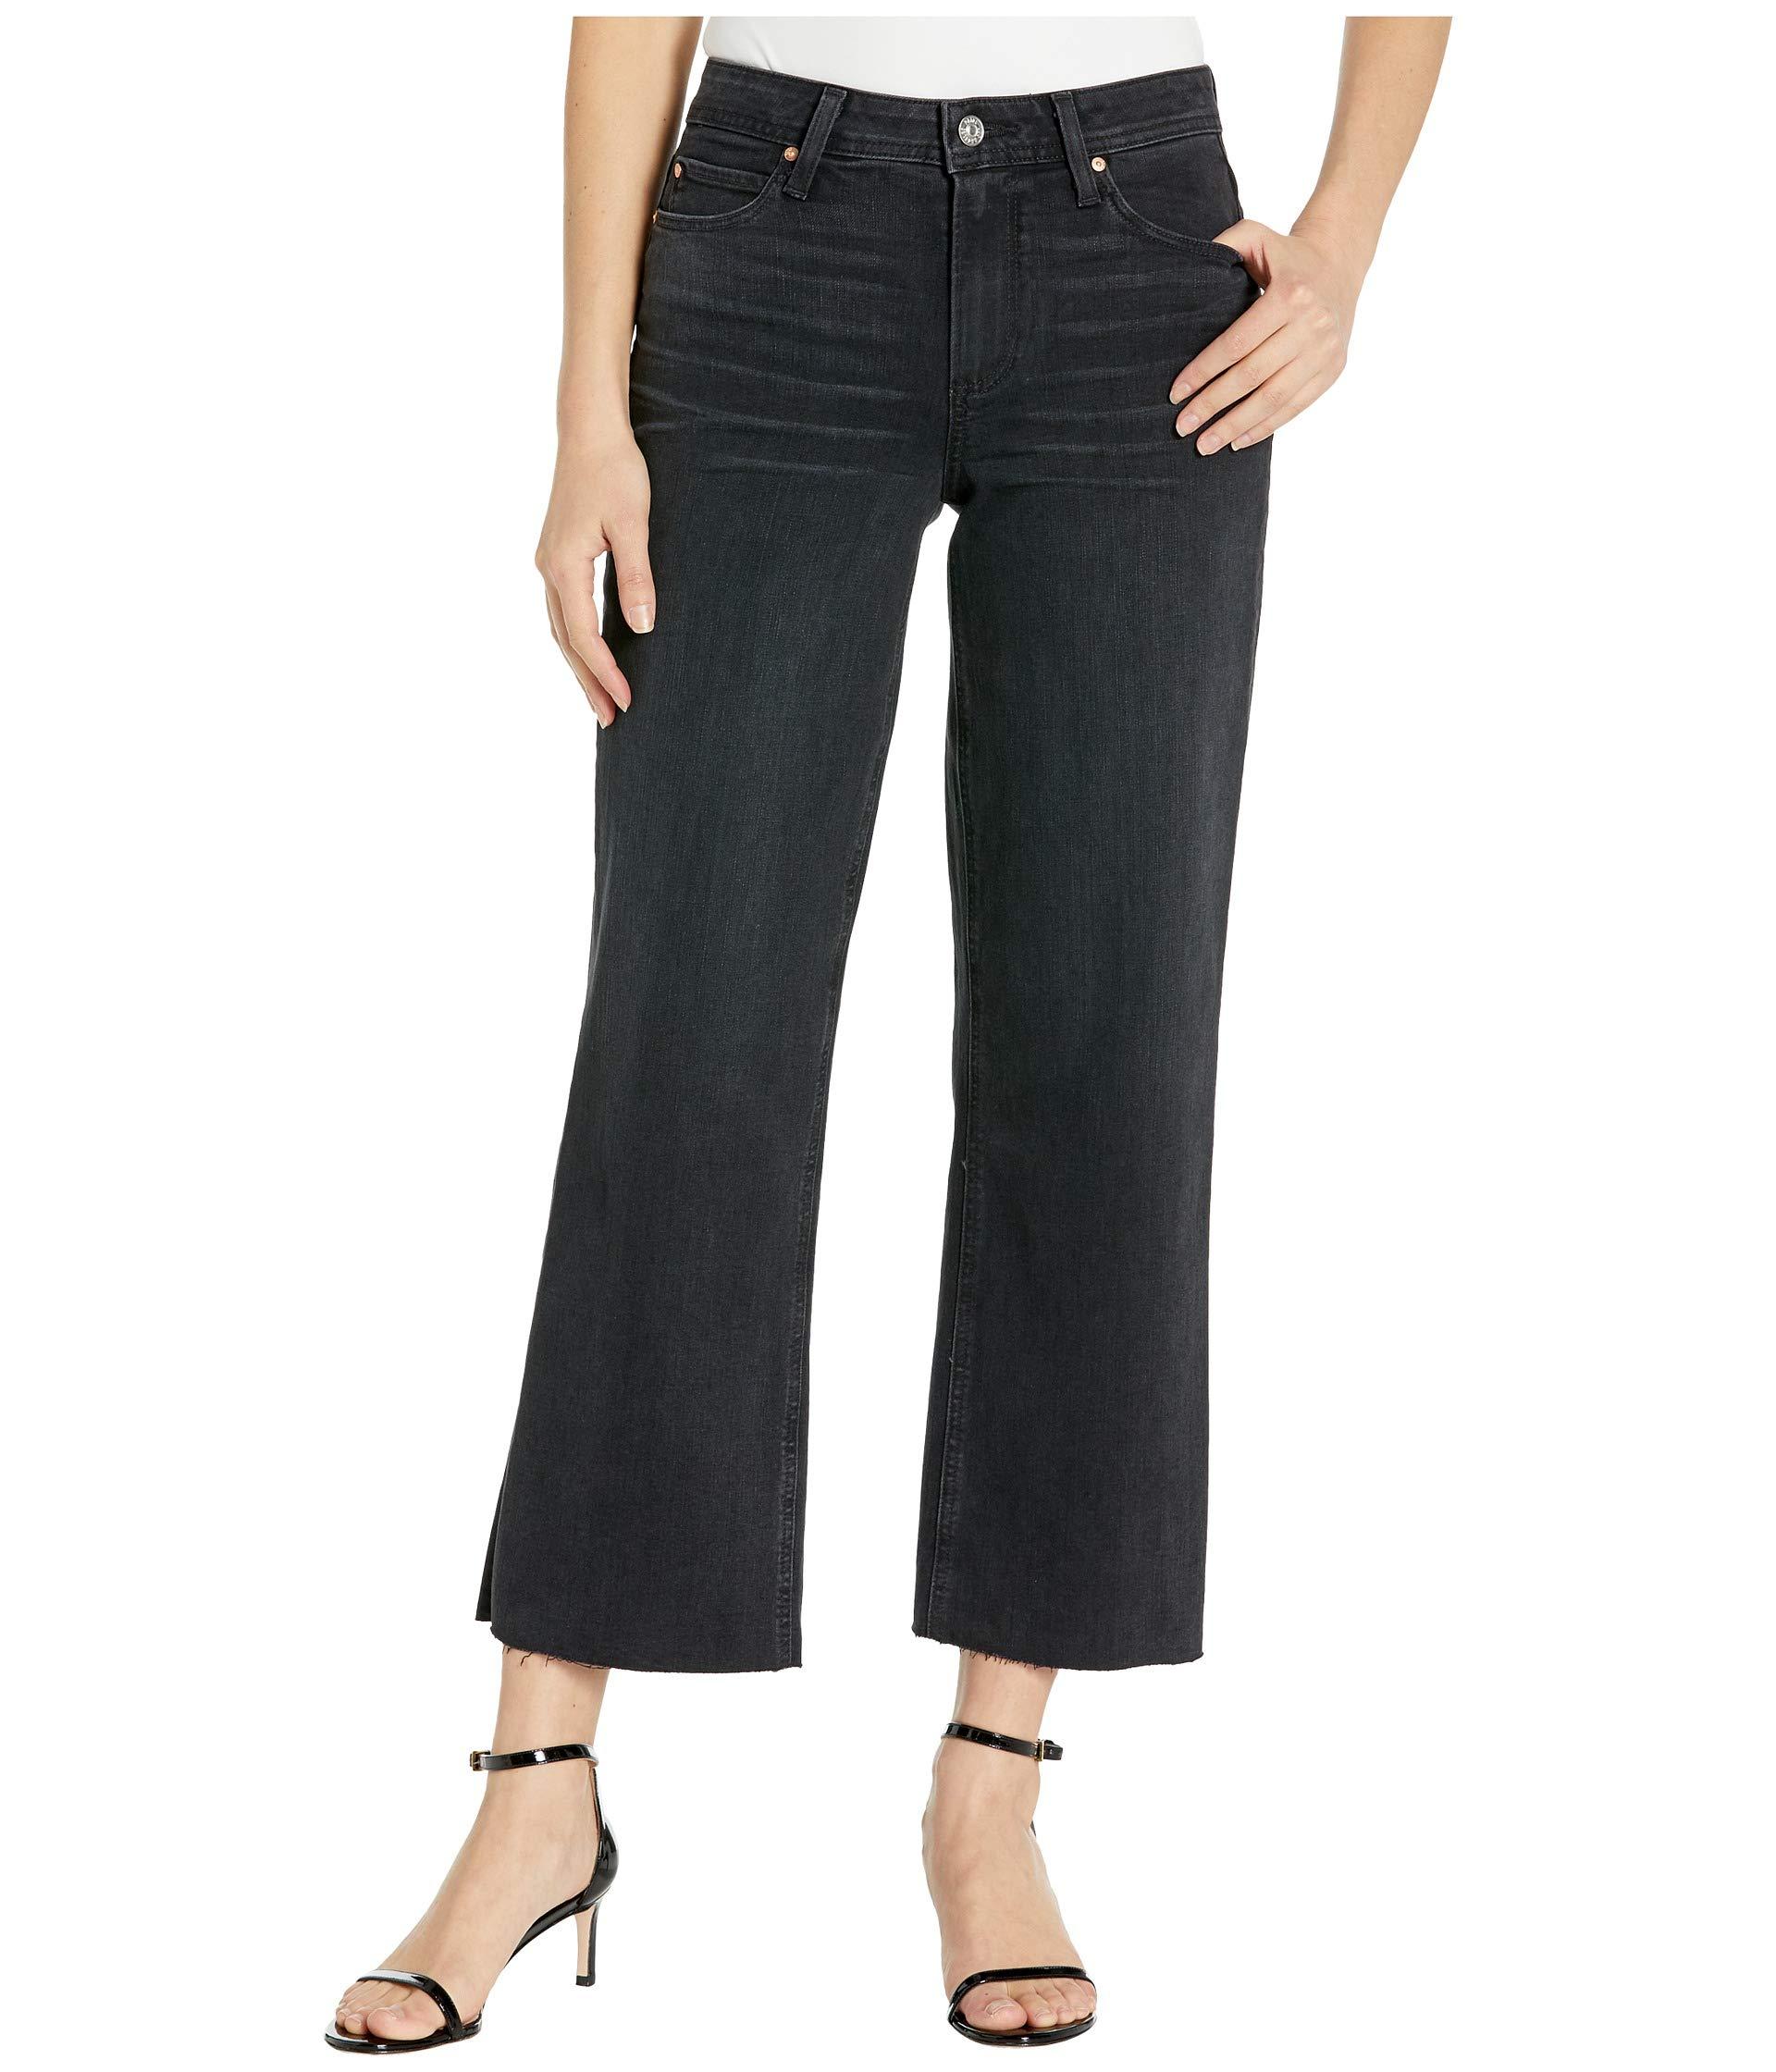 PAIGE Denim Nellie Culotte Jeans W/ Crossed Back Belt Loops And Raw Hem ...